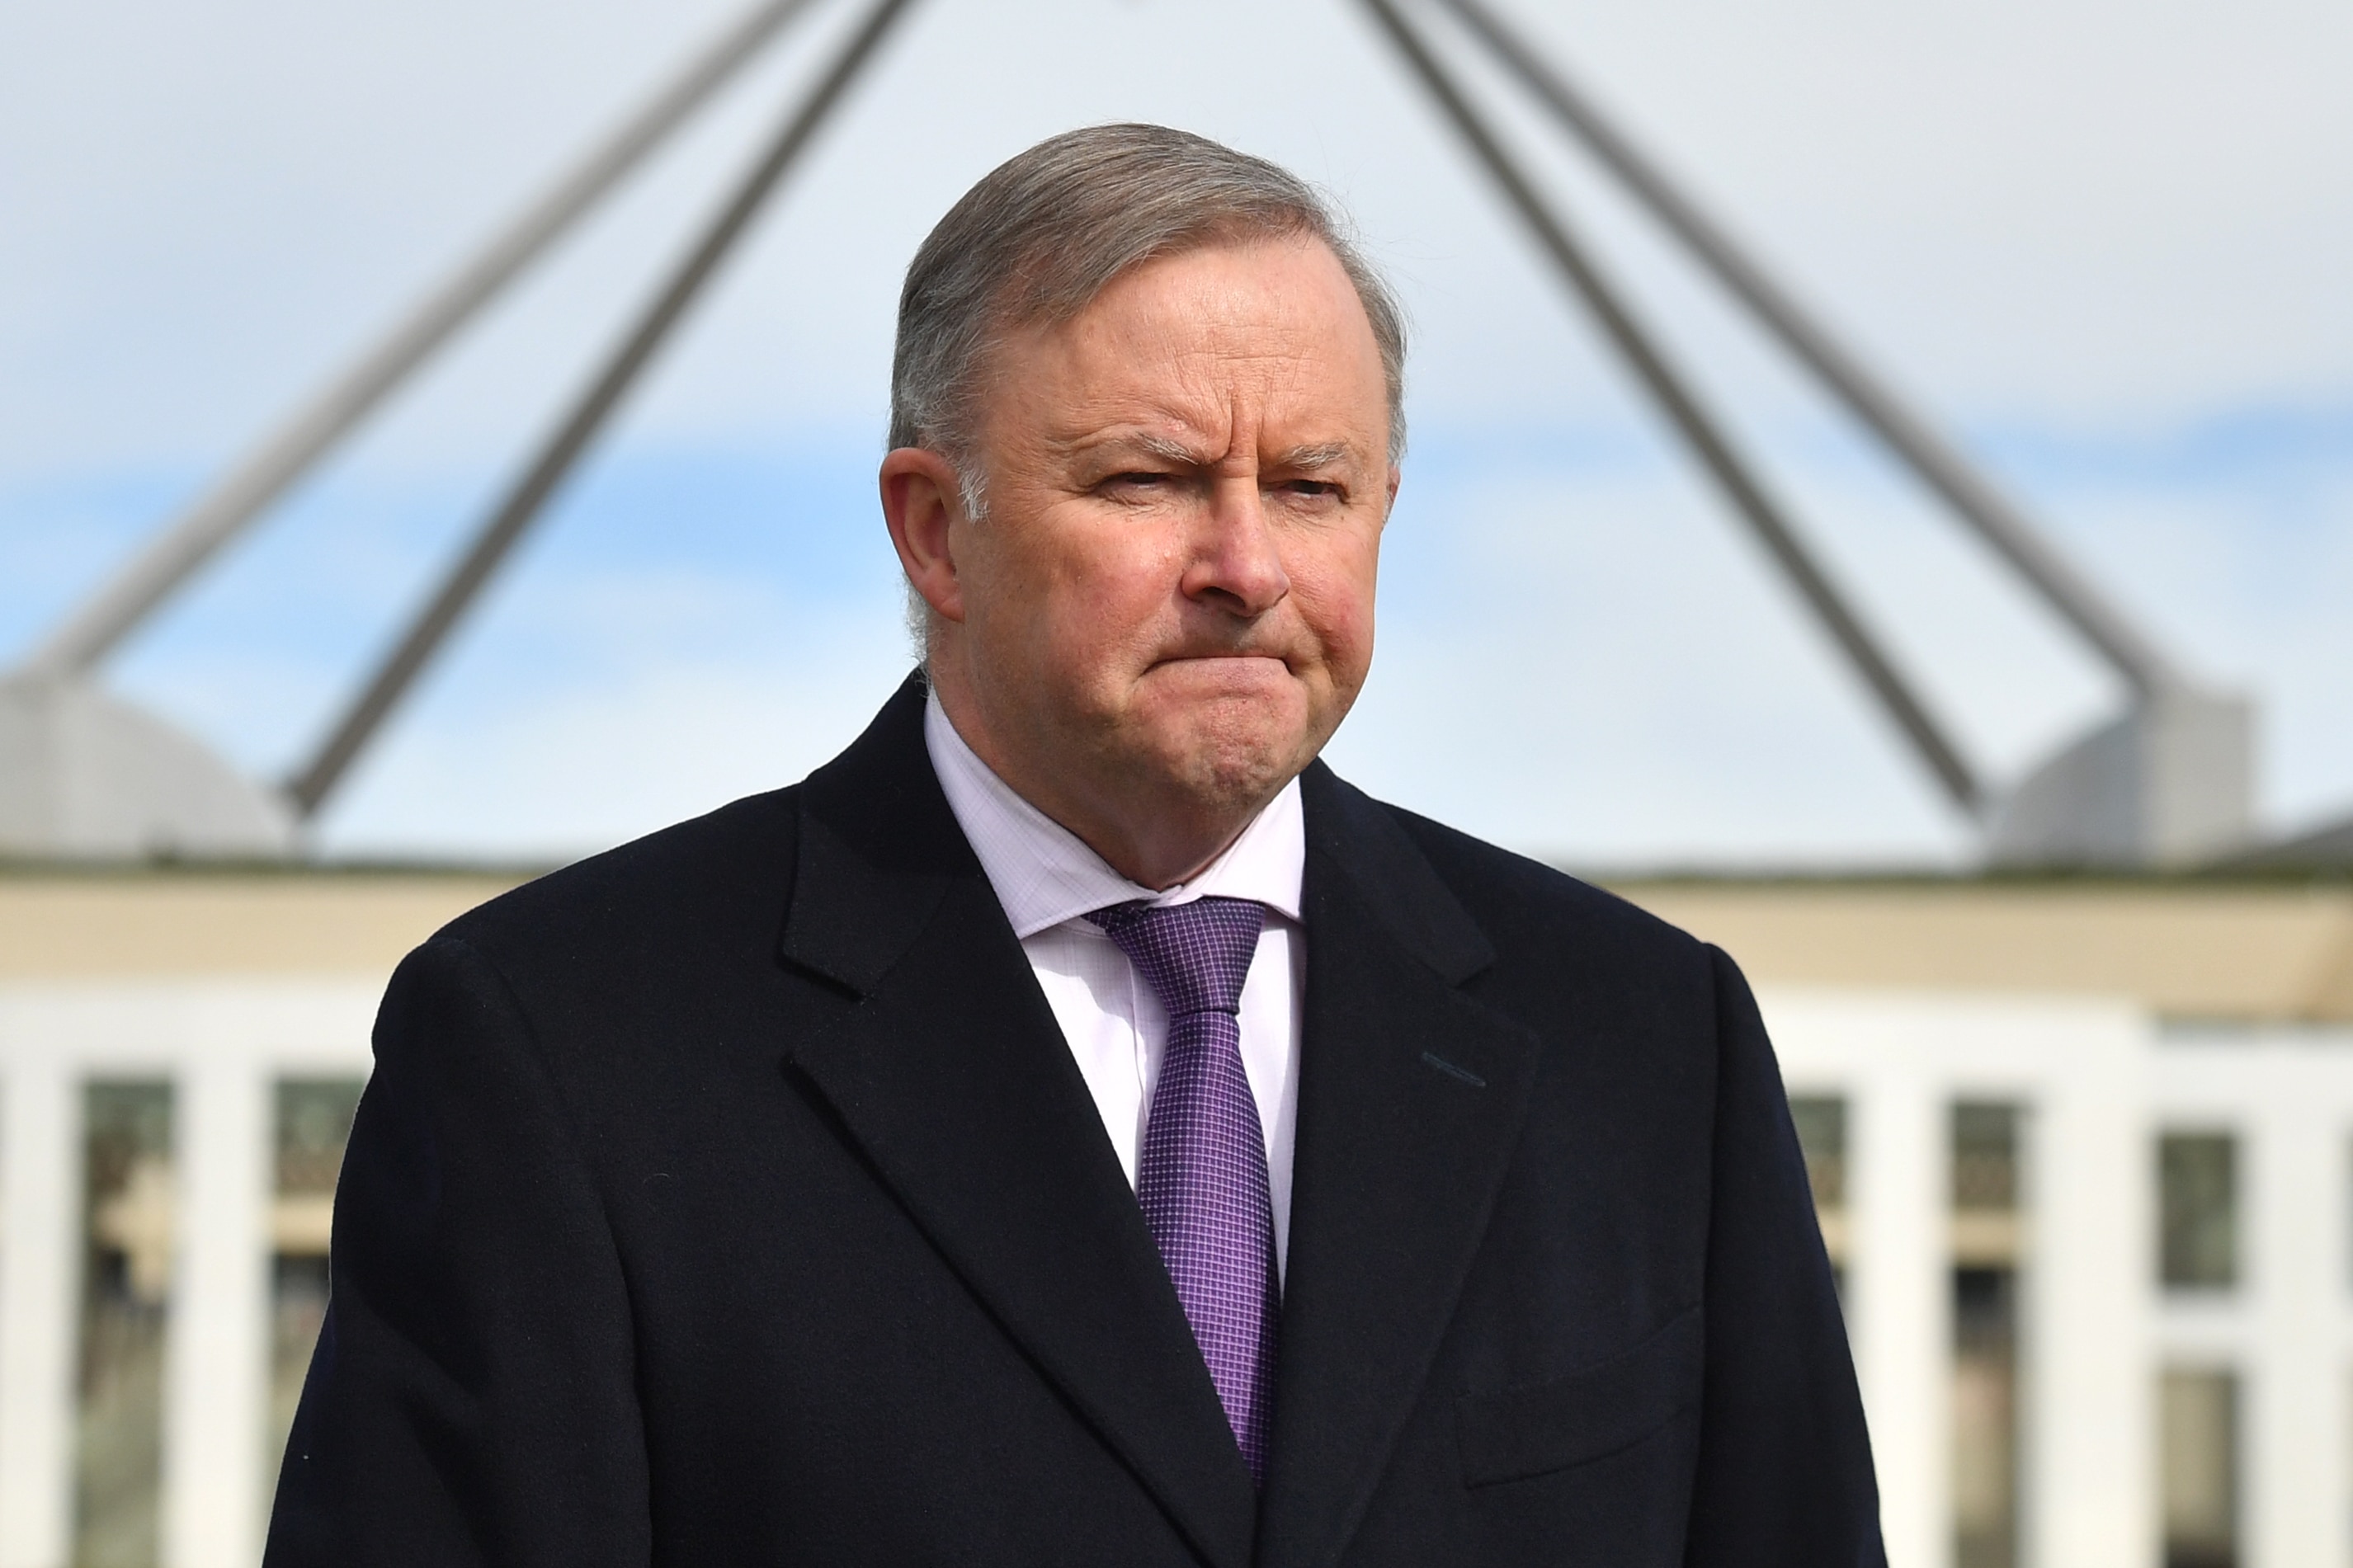 Leader of the Opposition Anthony Albanese 